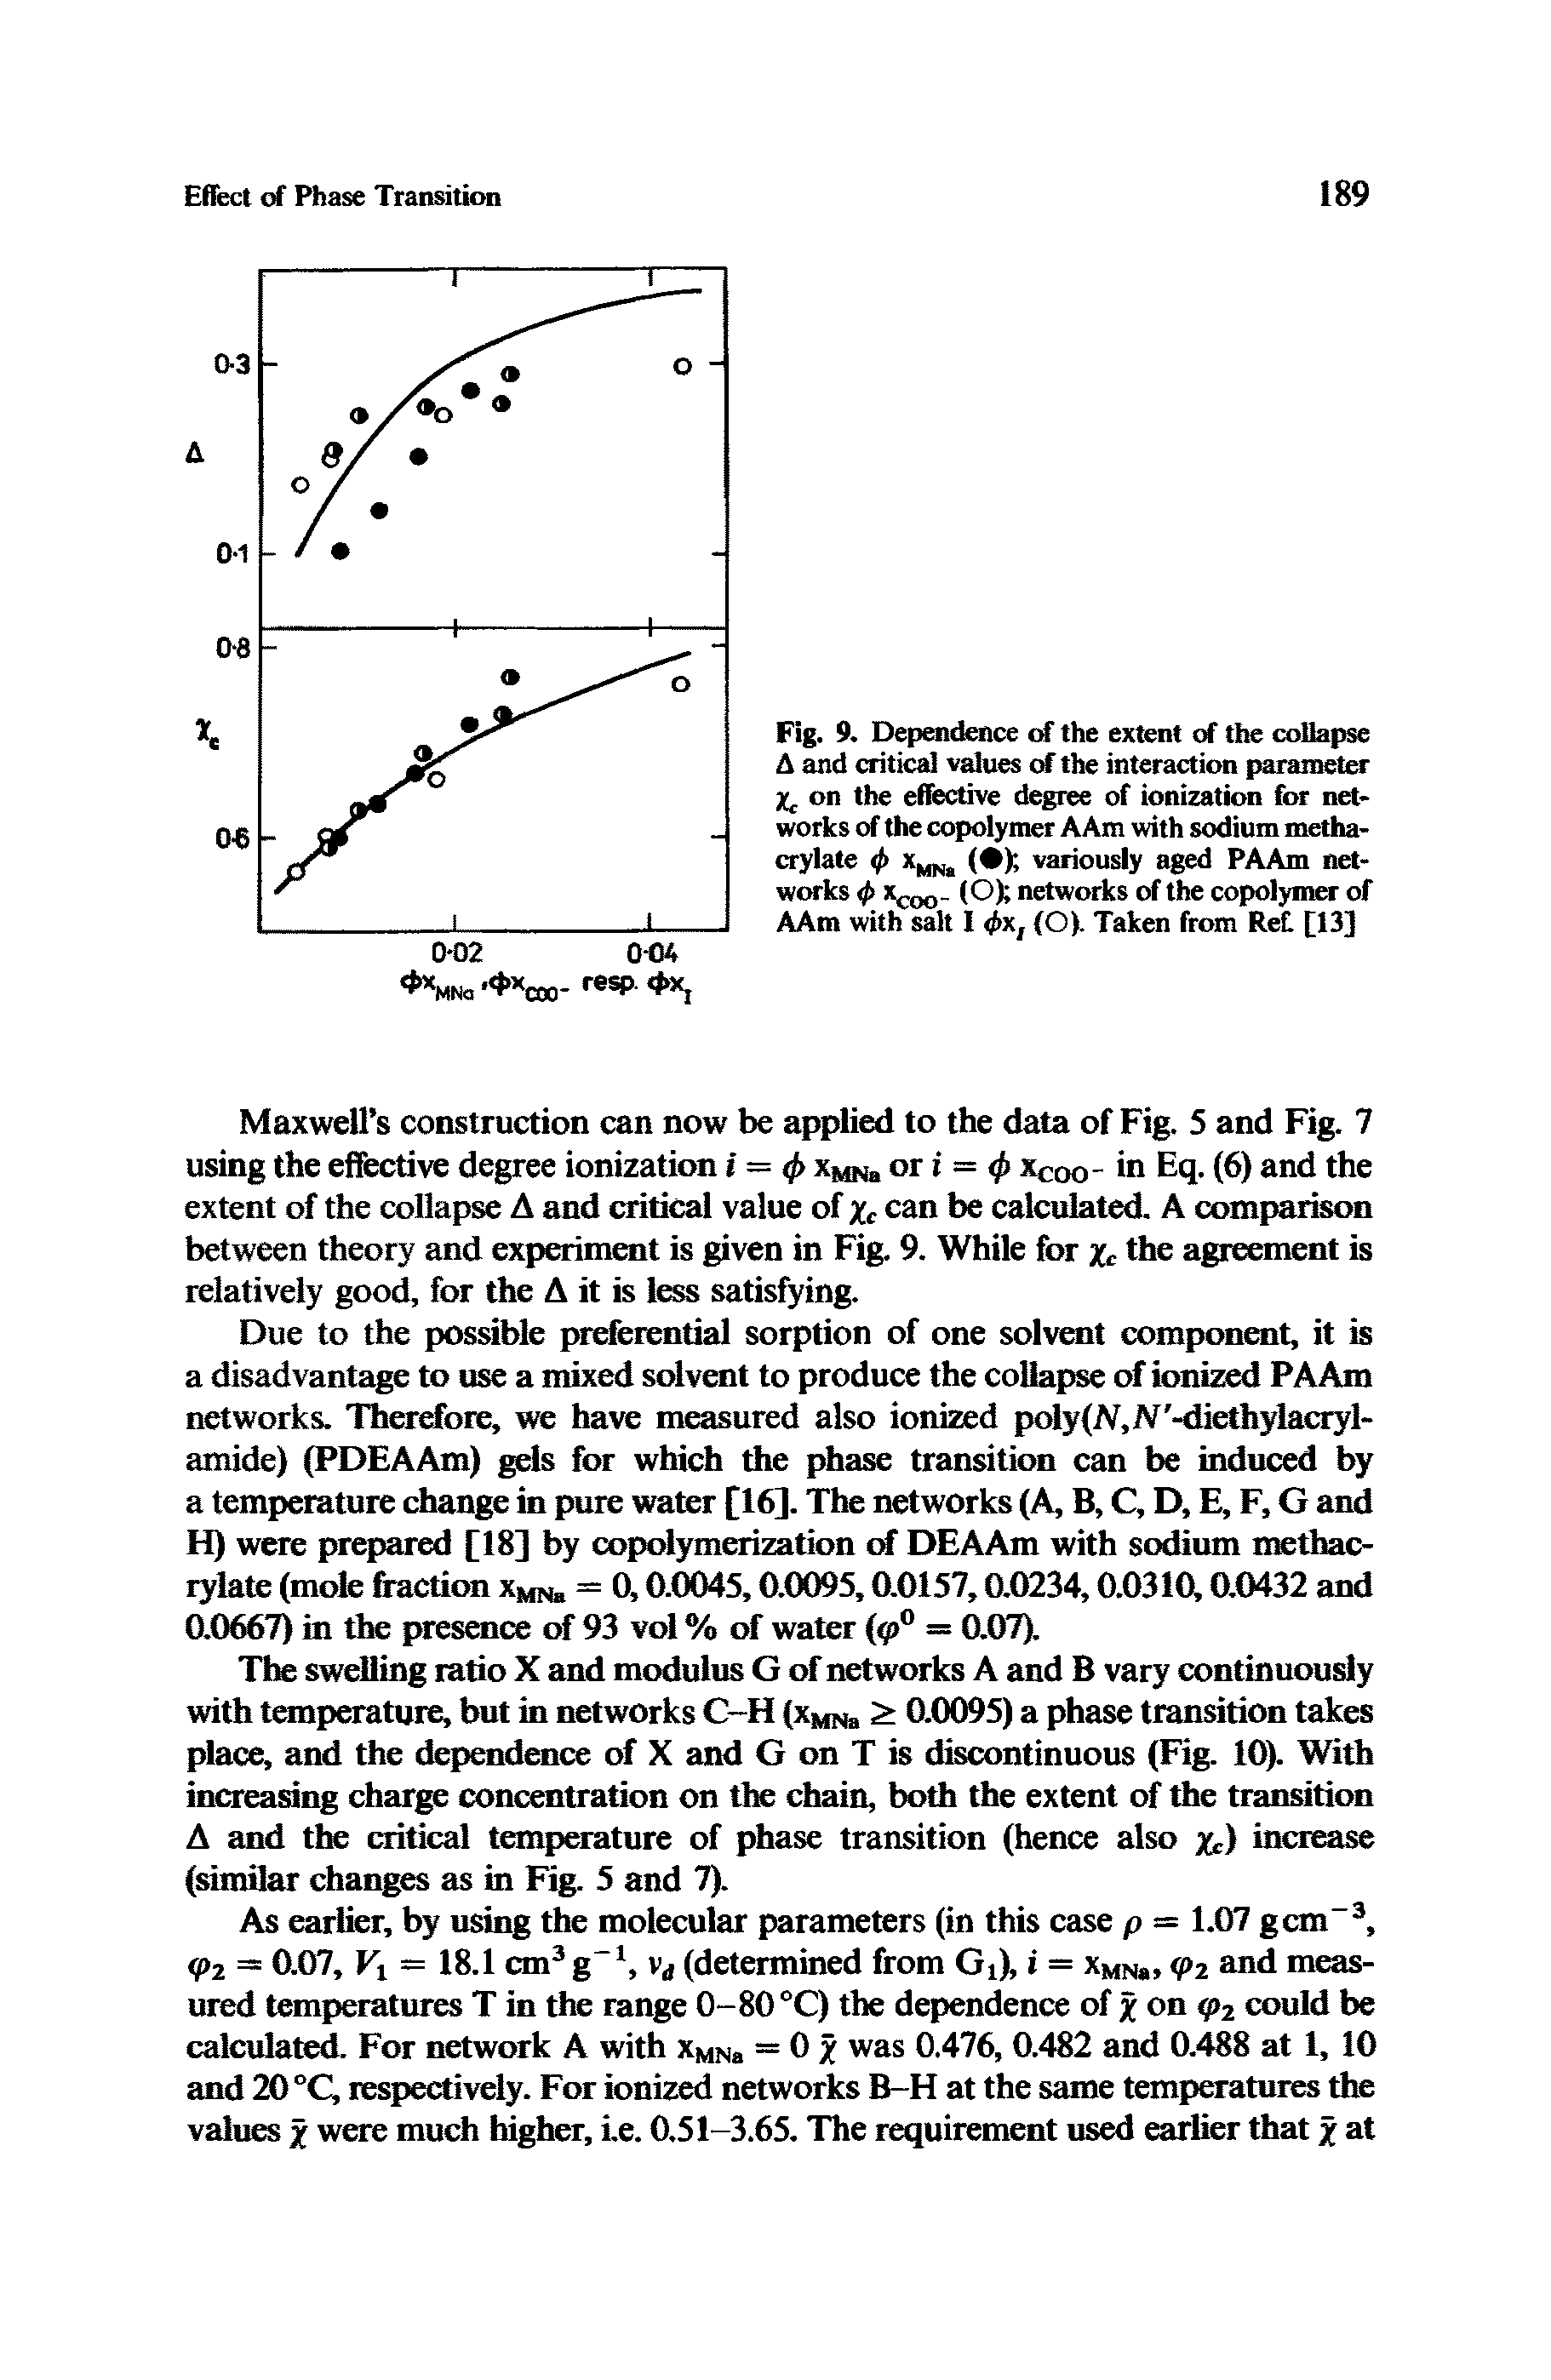 Fig. 9. Dependence of the extent of the collapse A and critical values of the interaction parameter Xc on the effective degree of ionization for networks of the copolymer AAm with sodium methacrylate xMN> ( ) variously aged PAAm networks <p xcoo (O) networks of the copolymer of AAm with salt I <t>x, (O). Taken from Ret [13]...